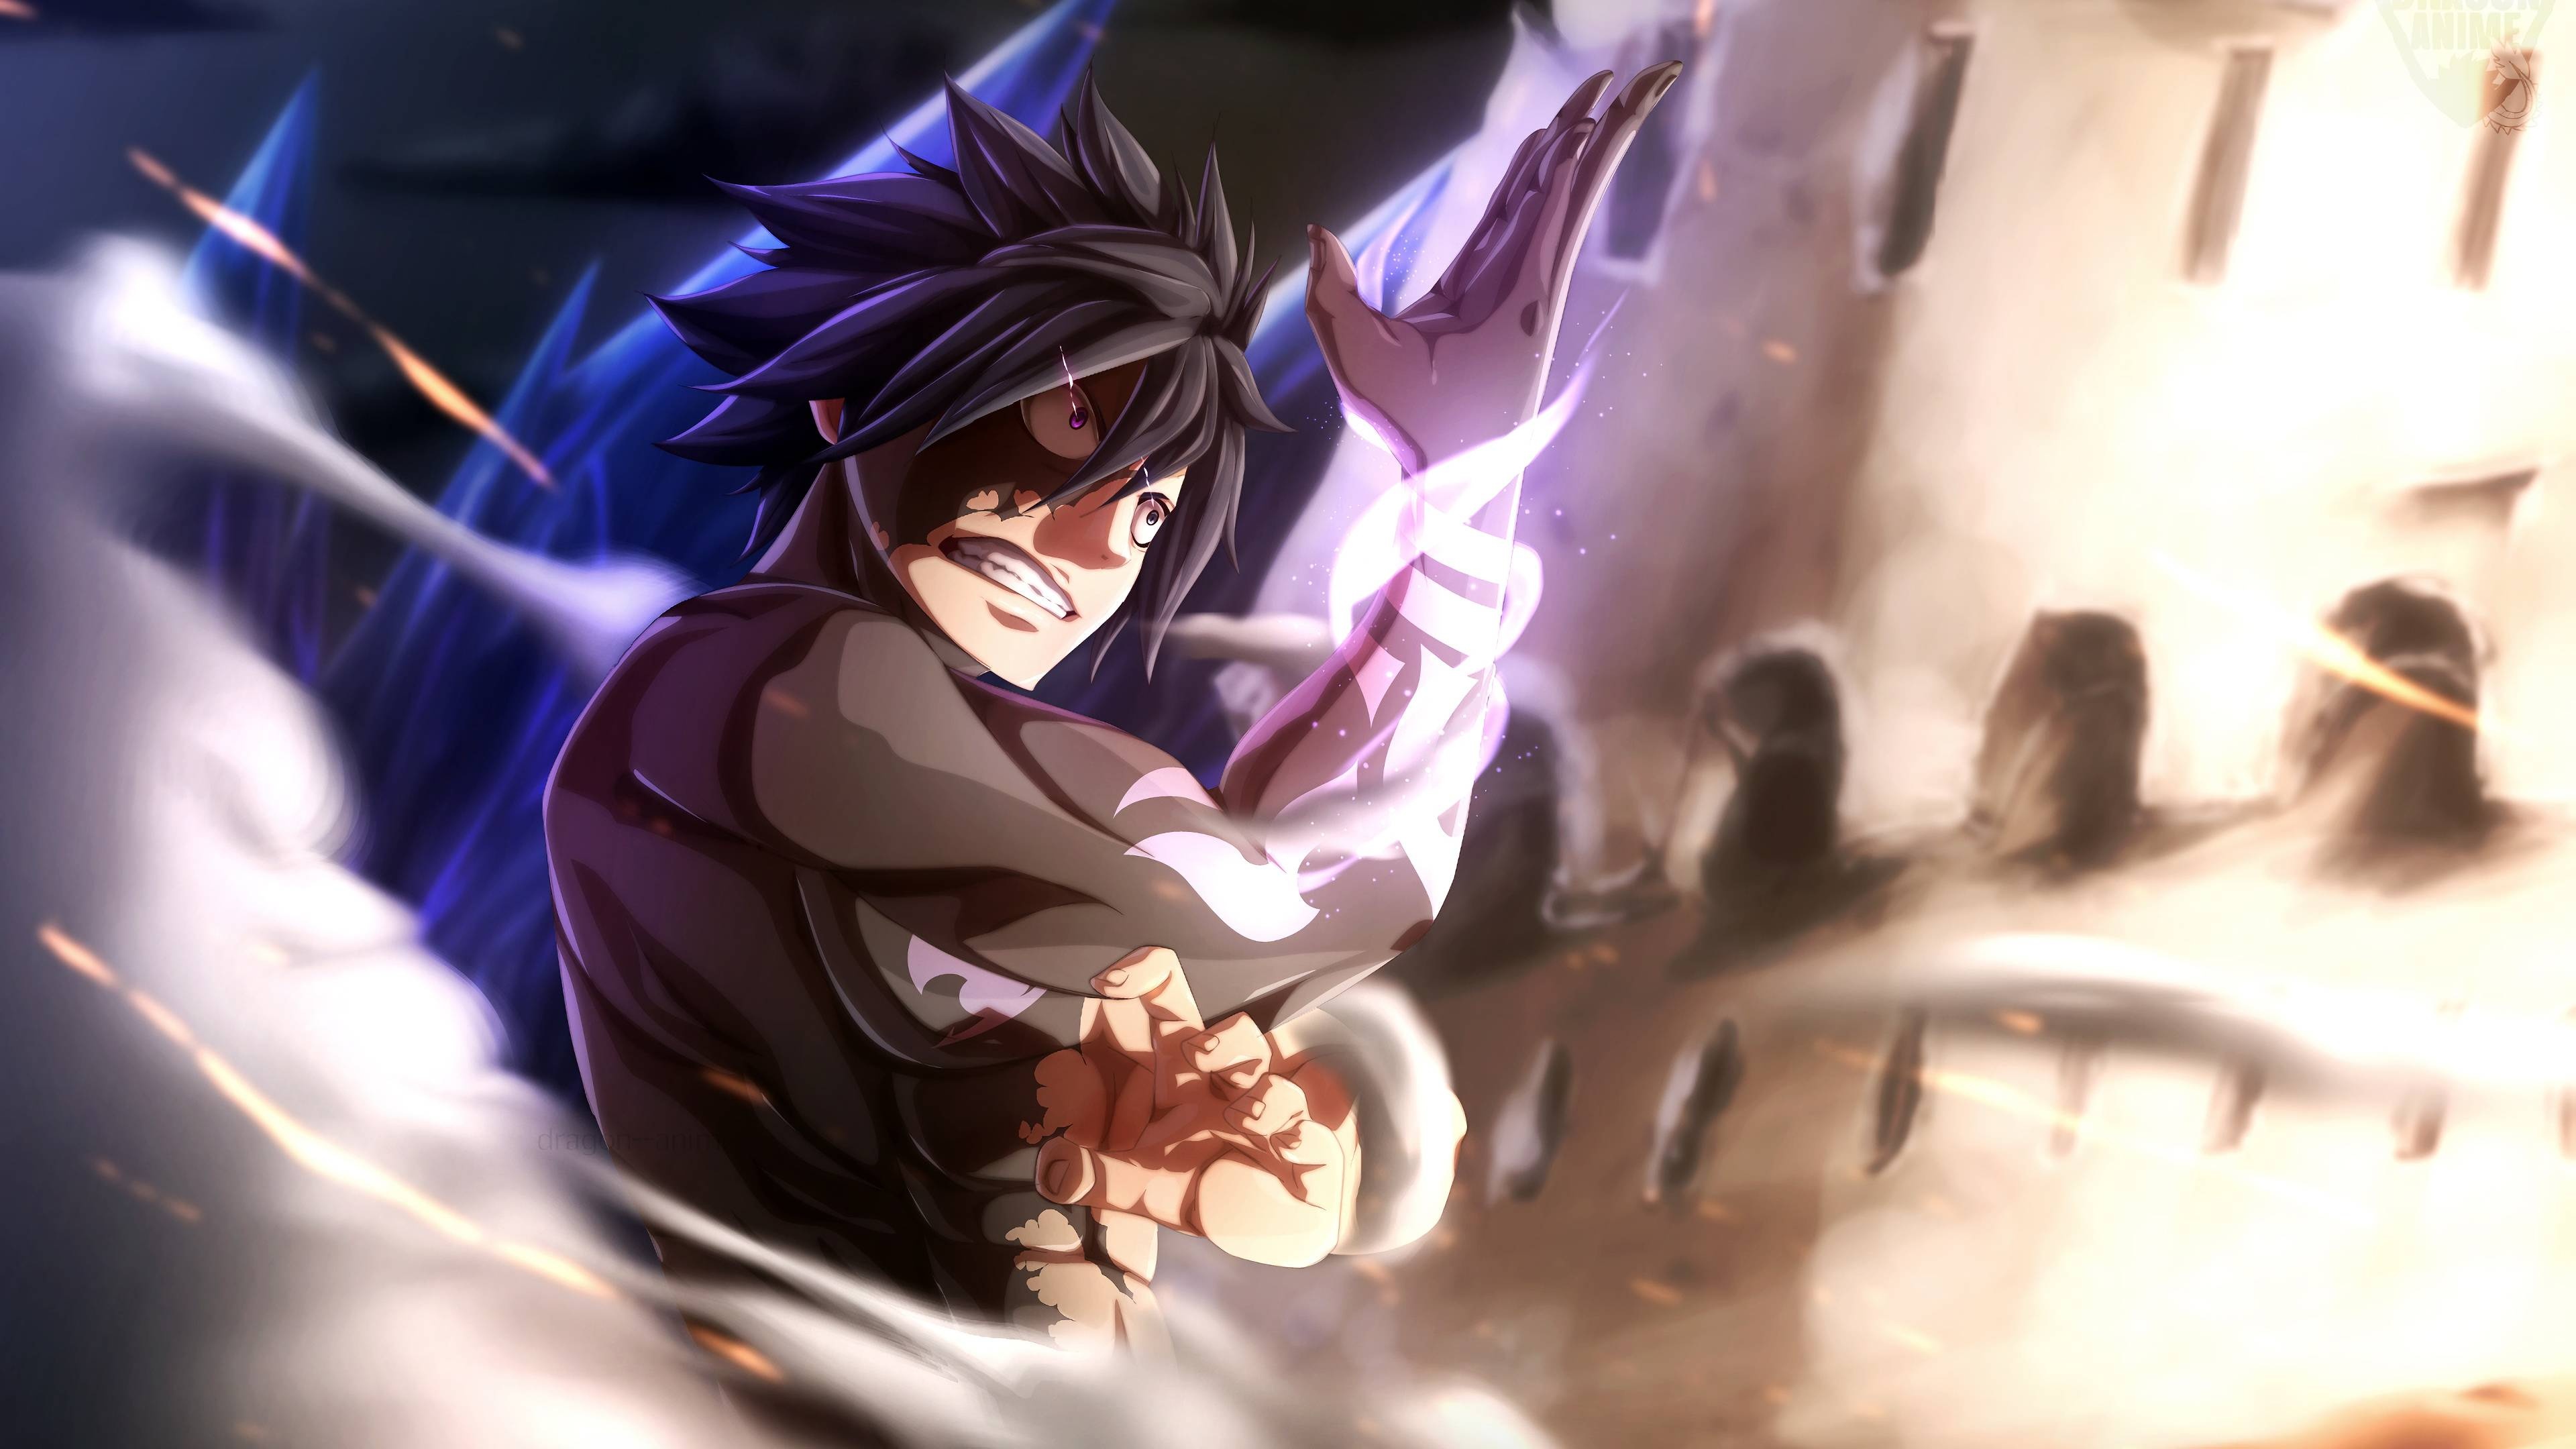 Gray Fullbuster: The tritagonist of the anime, Fairy Tail, Illustrated by Hiro Mashima. 3840x2160 4K Wallpaper.